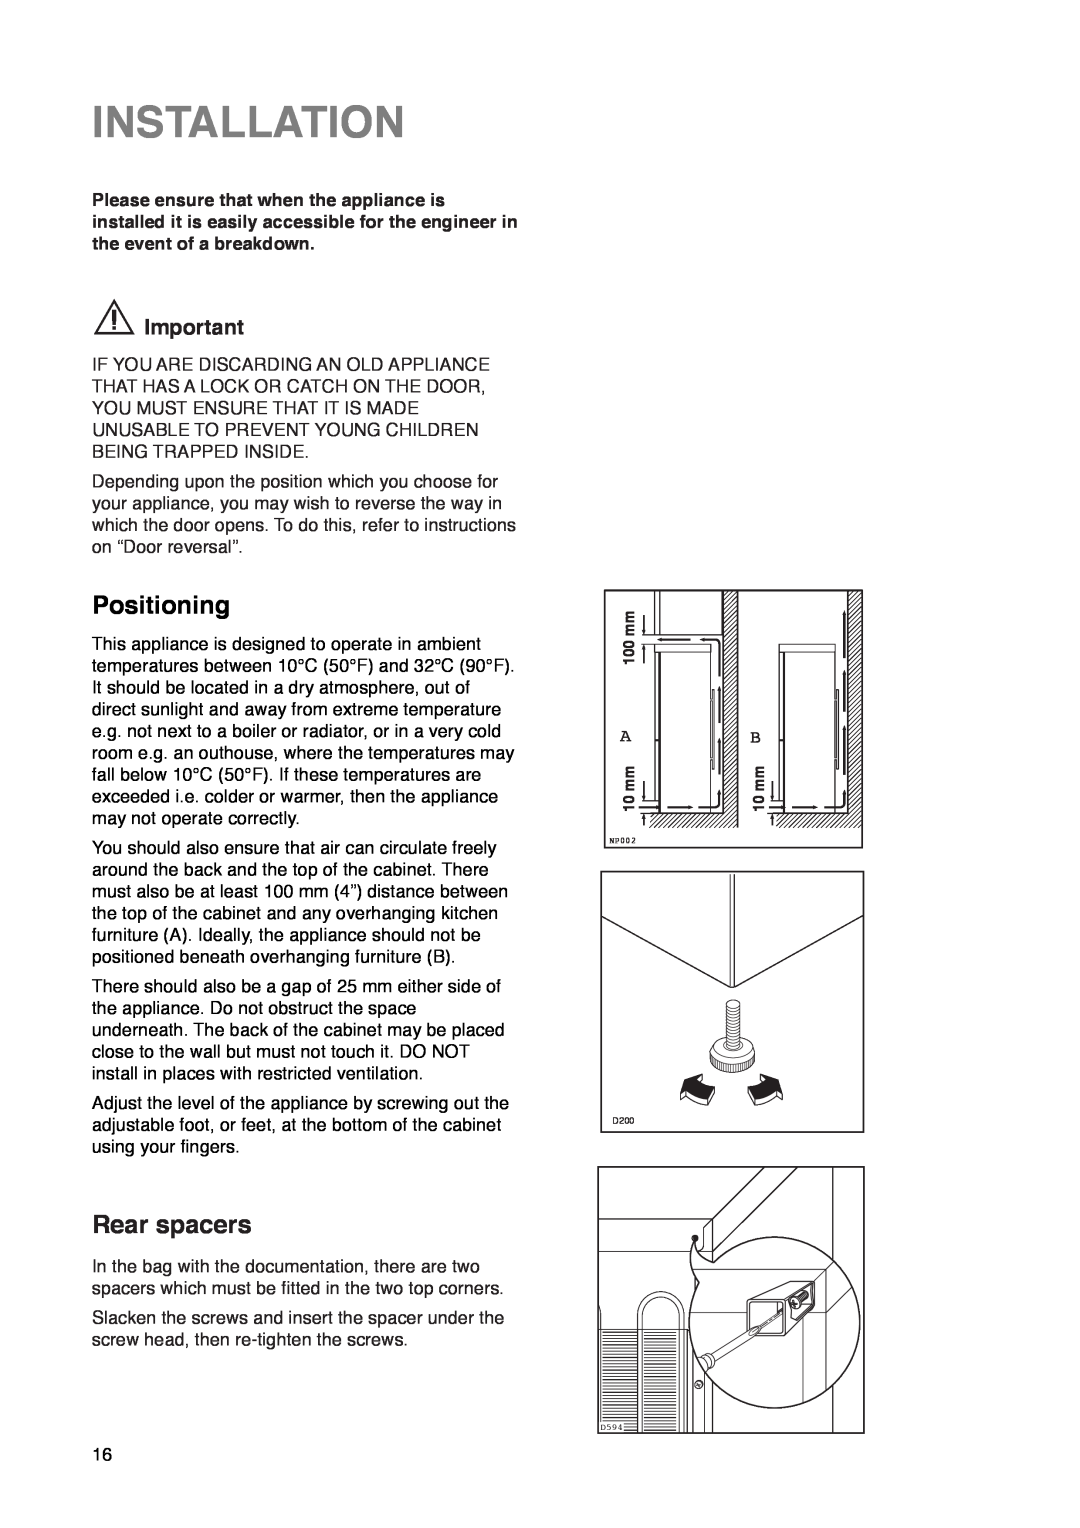 Zanussi ZK 61/27 RAL manual Installation, Positioning, Rear spacers 